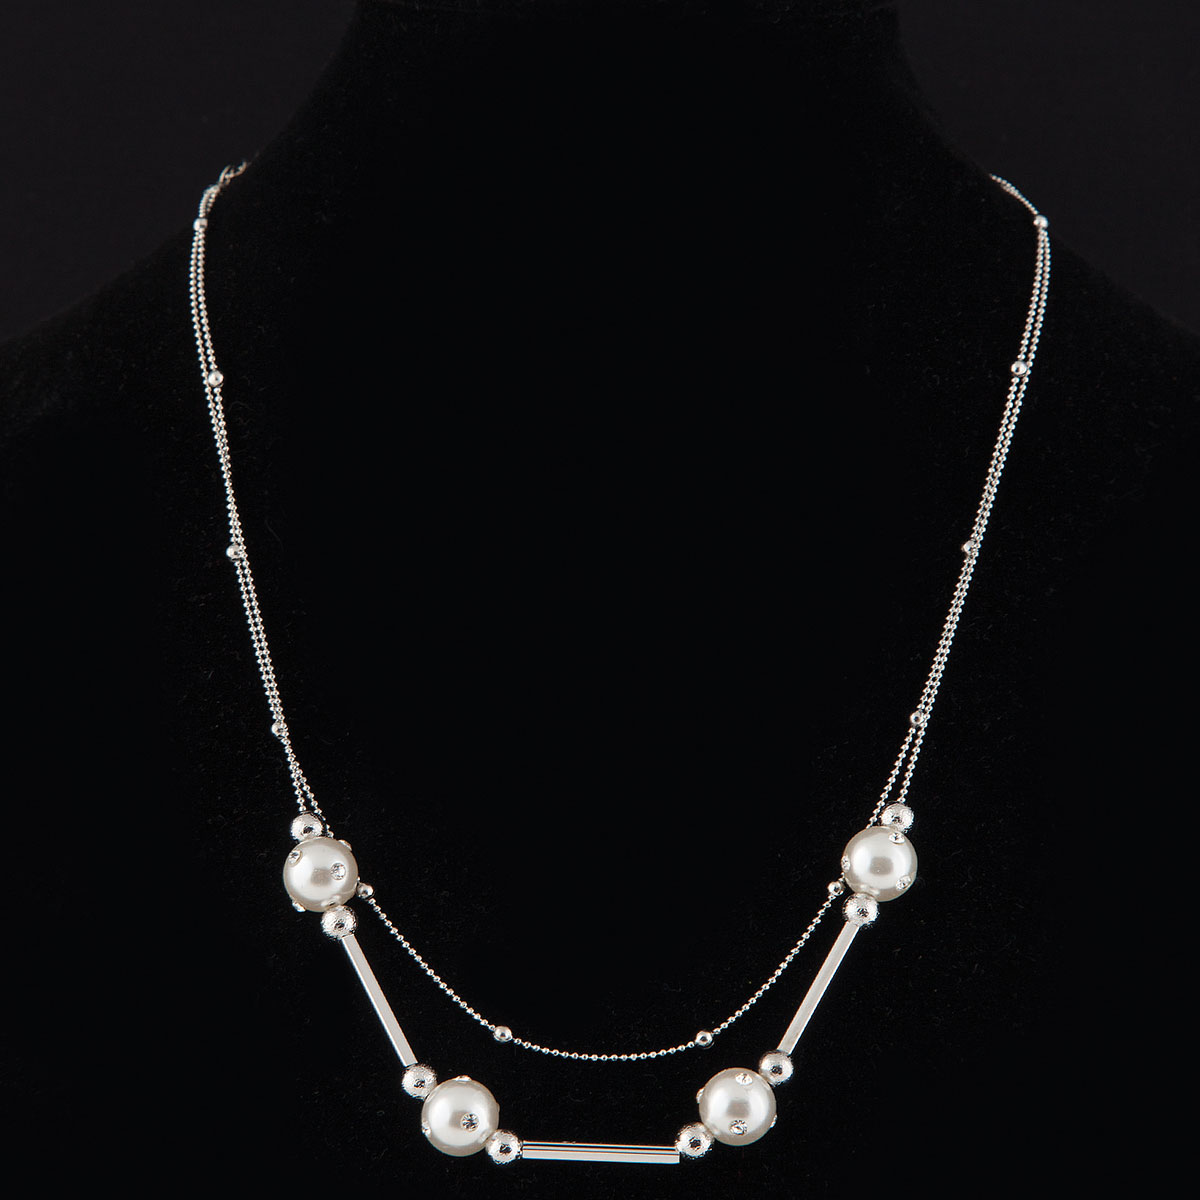 Delicate Pearls with Silver Balls on Double Chain Necklace 16"-1